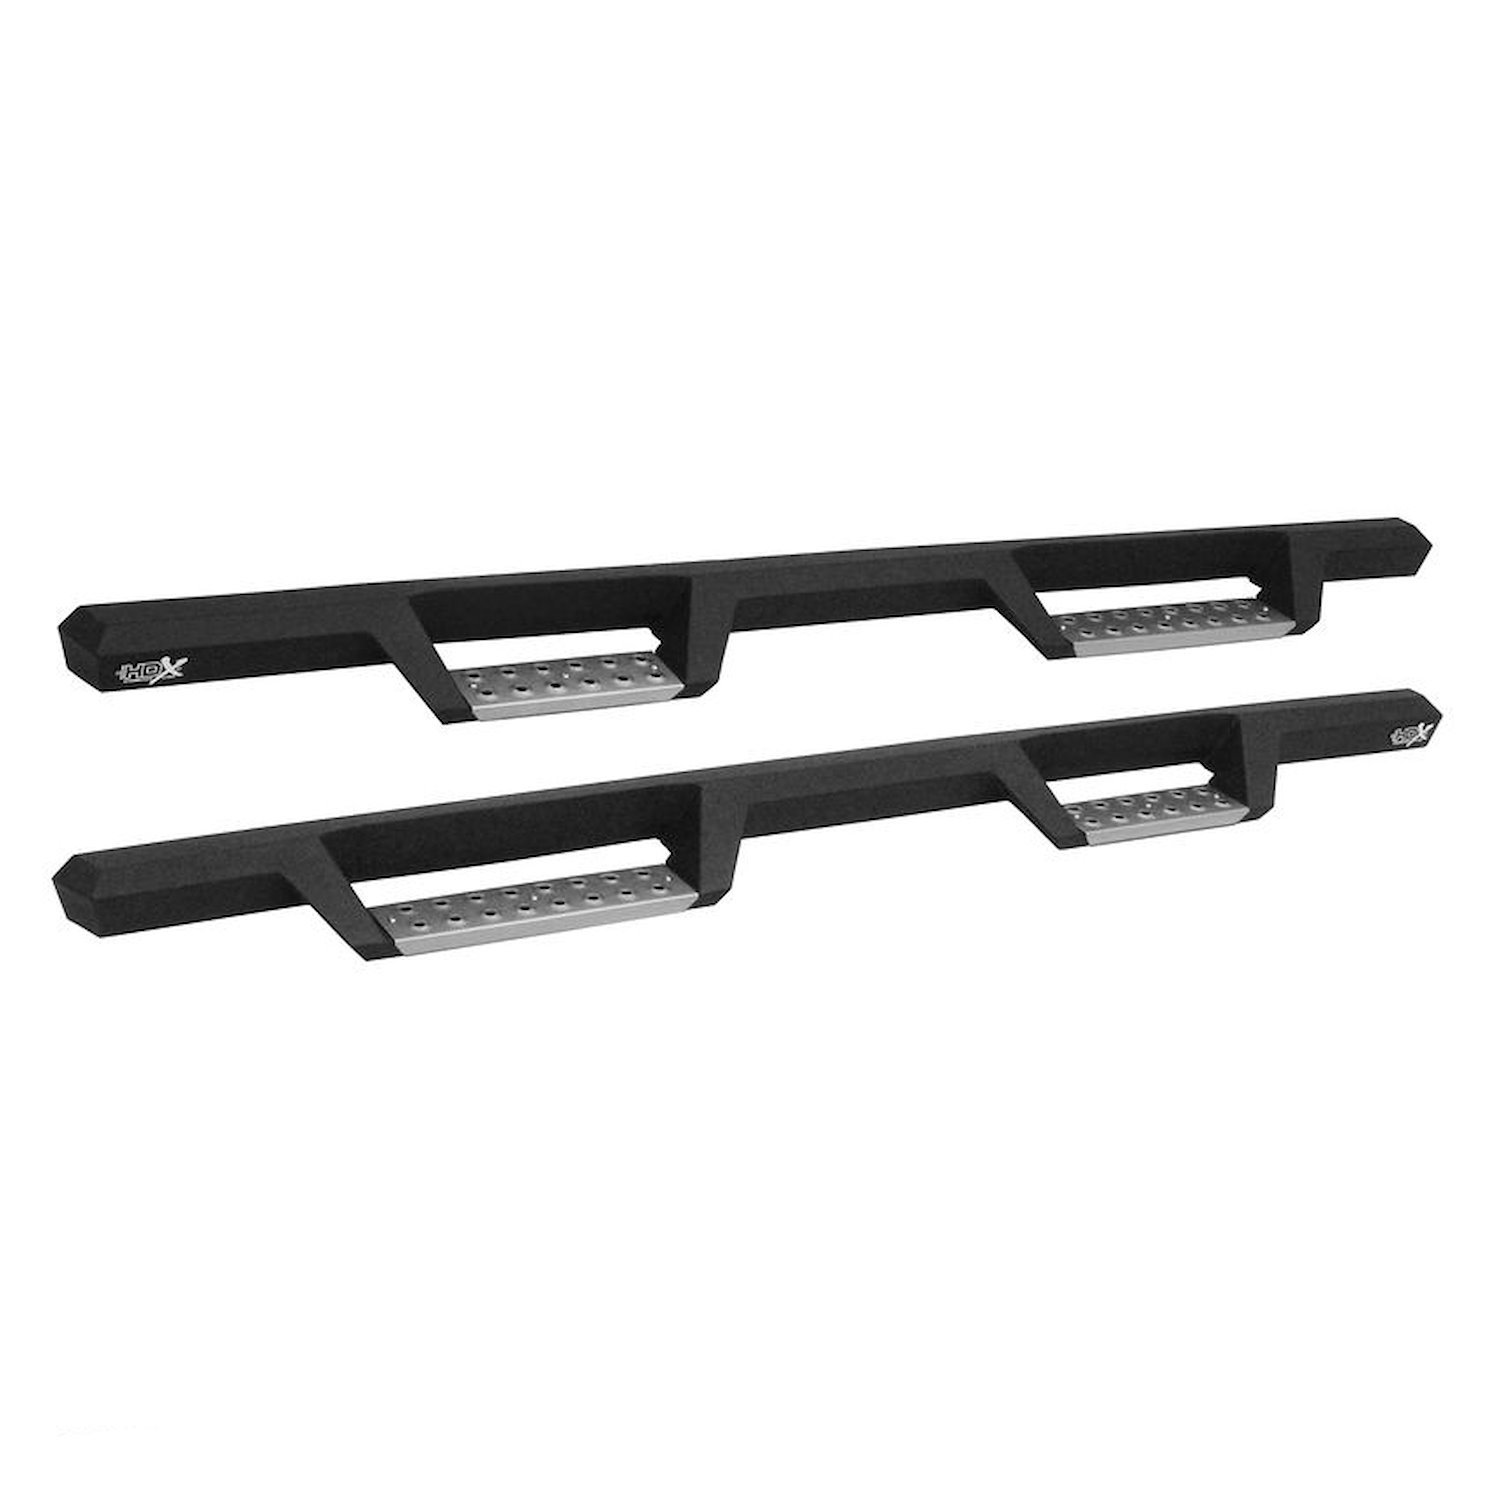 HDX Drop Step Nerf Bars for 2015-2018 Chevy Colorado/GMC Canyon Crew Cab